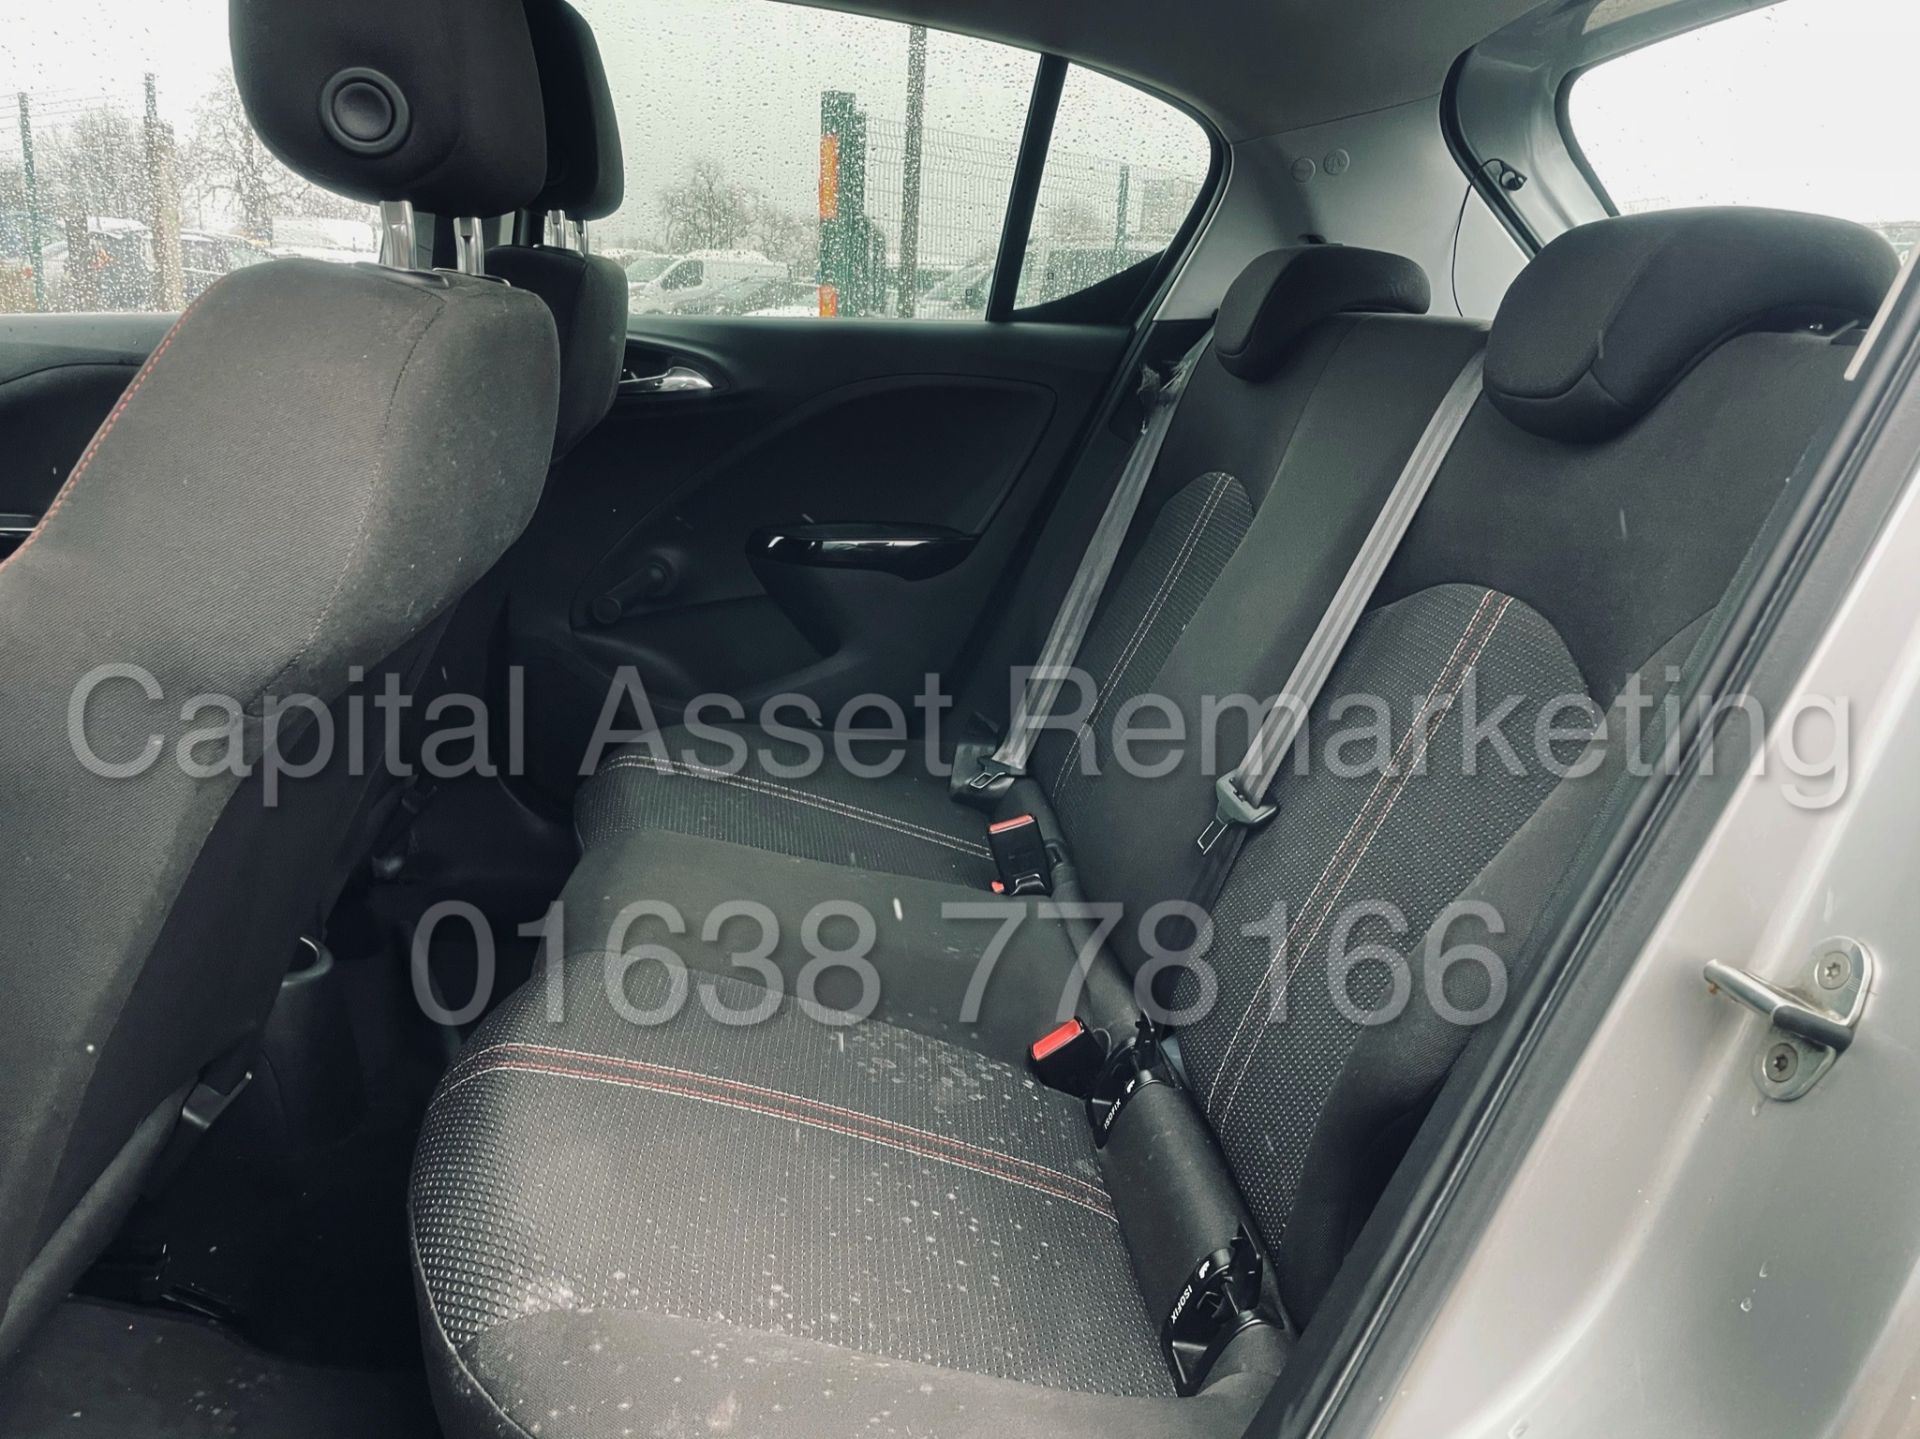 ON SALE VAUXHALL CORSA *LIMITED EDITION* 5 DOOR (2017 MODEL) '1.4 PETROL - ECOFLEX' *AIR CON* - Image 25 of 44